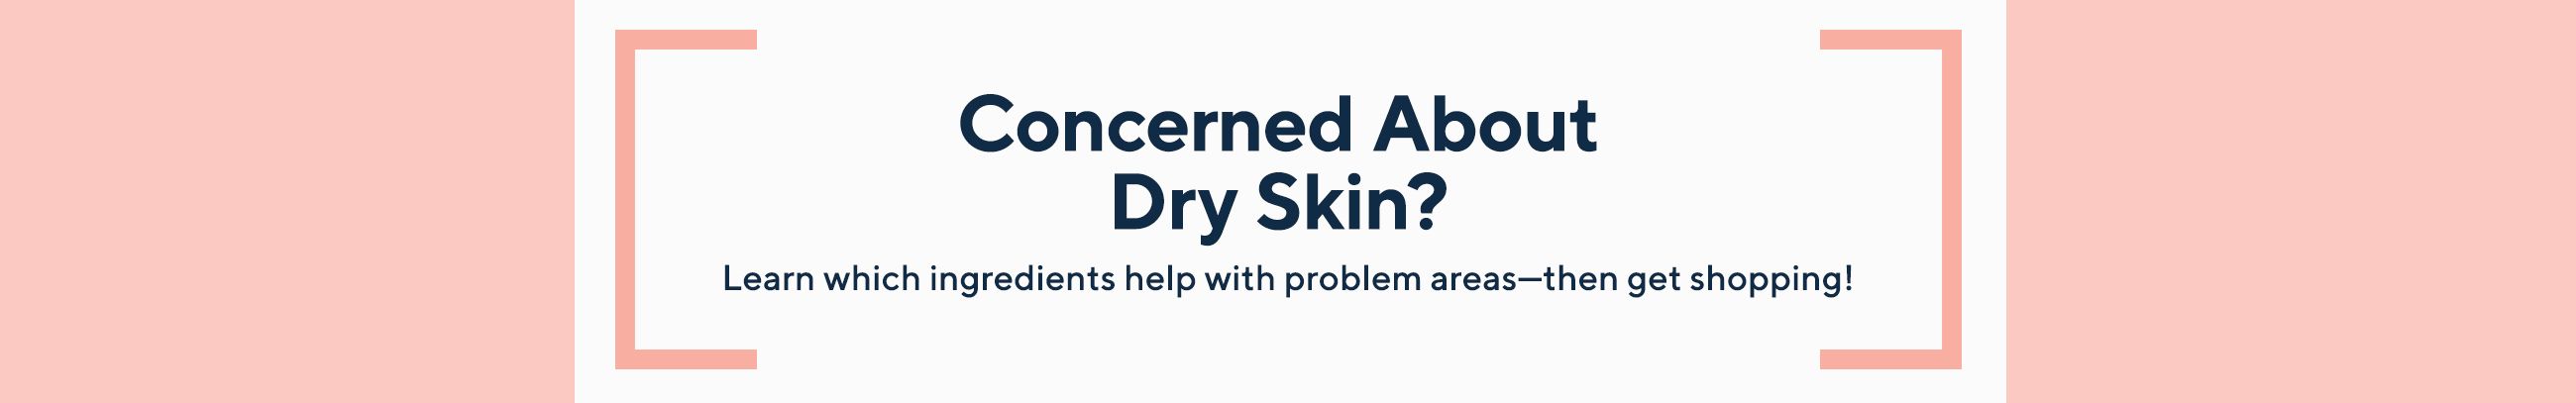 Concerned About Dry Skin?  Learn which ingredients help with problem areas—then get shopping!